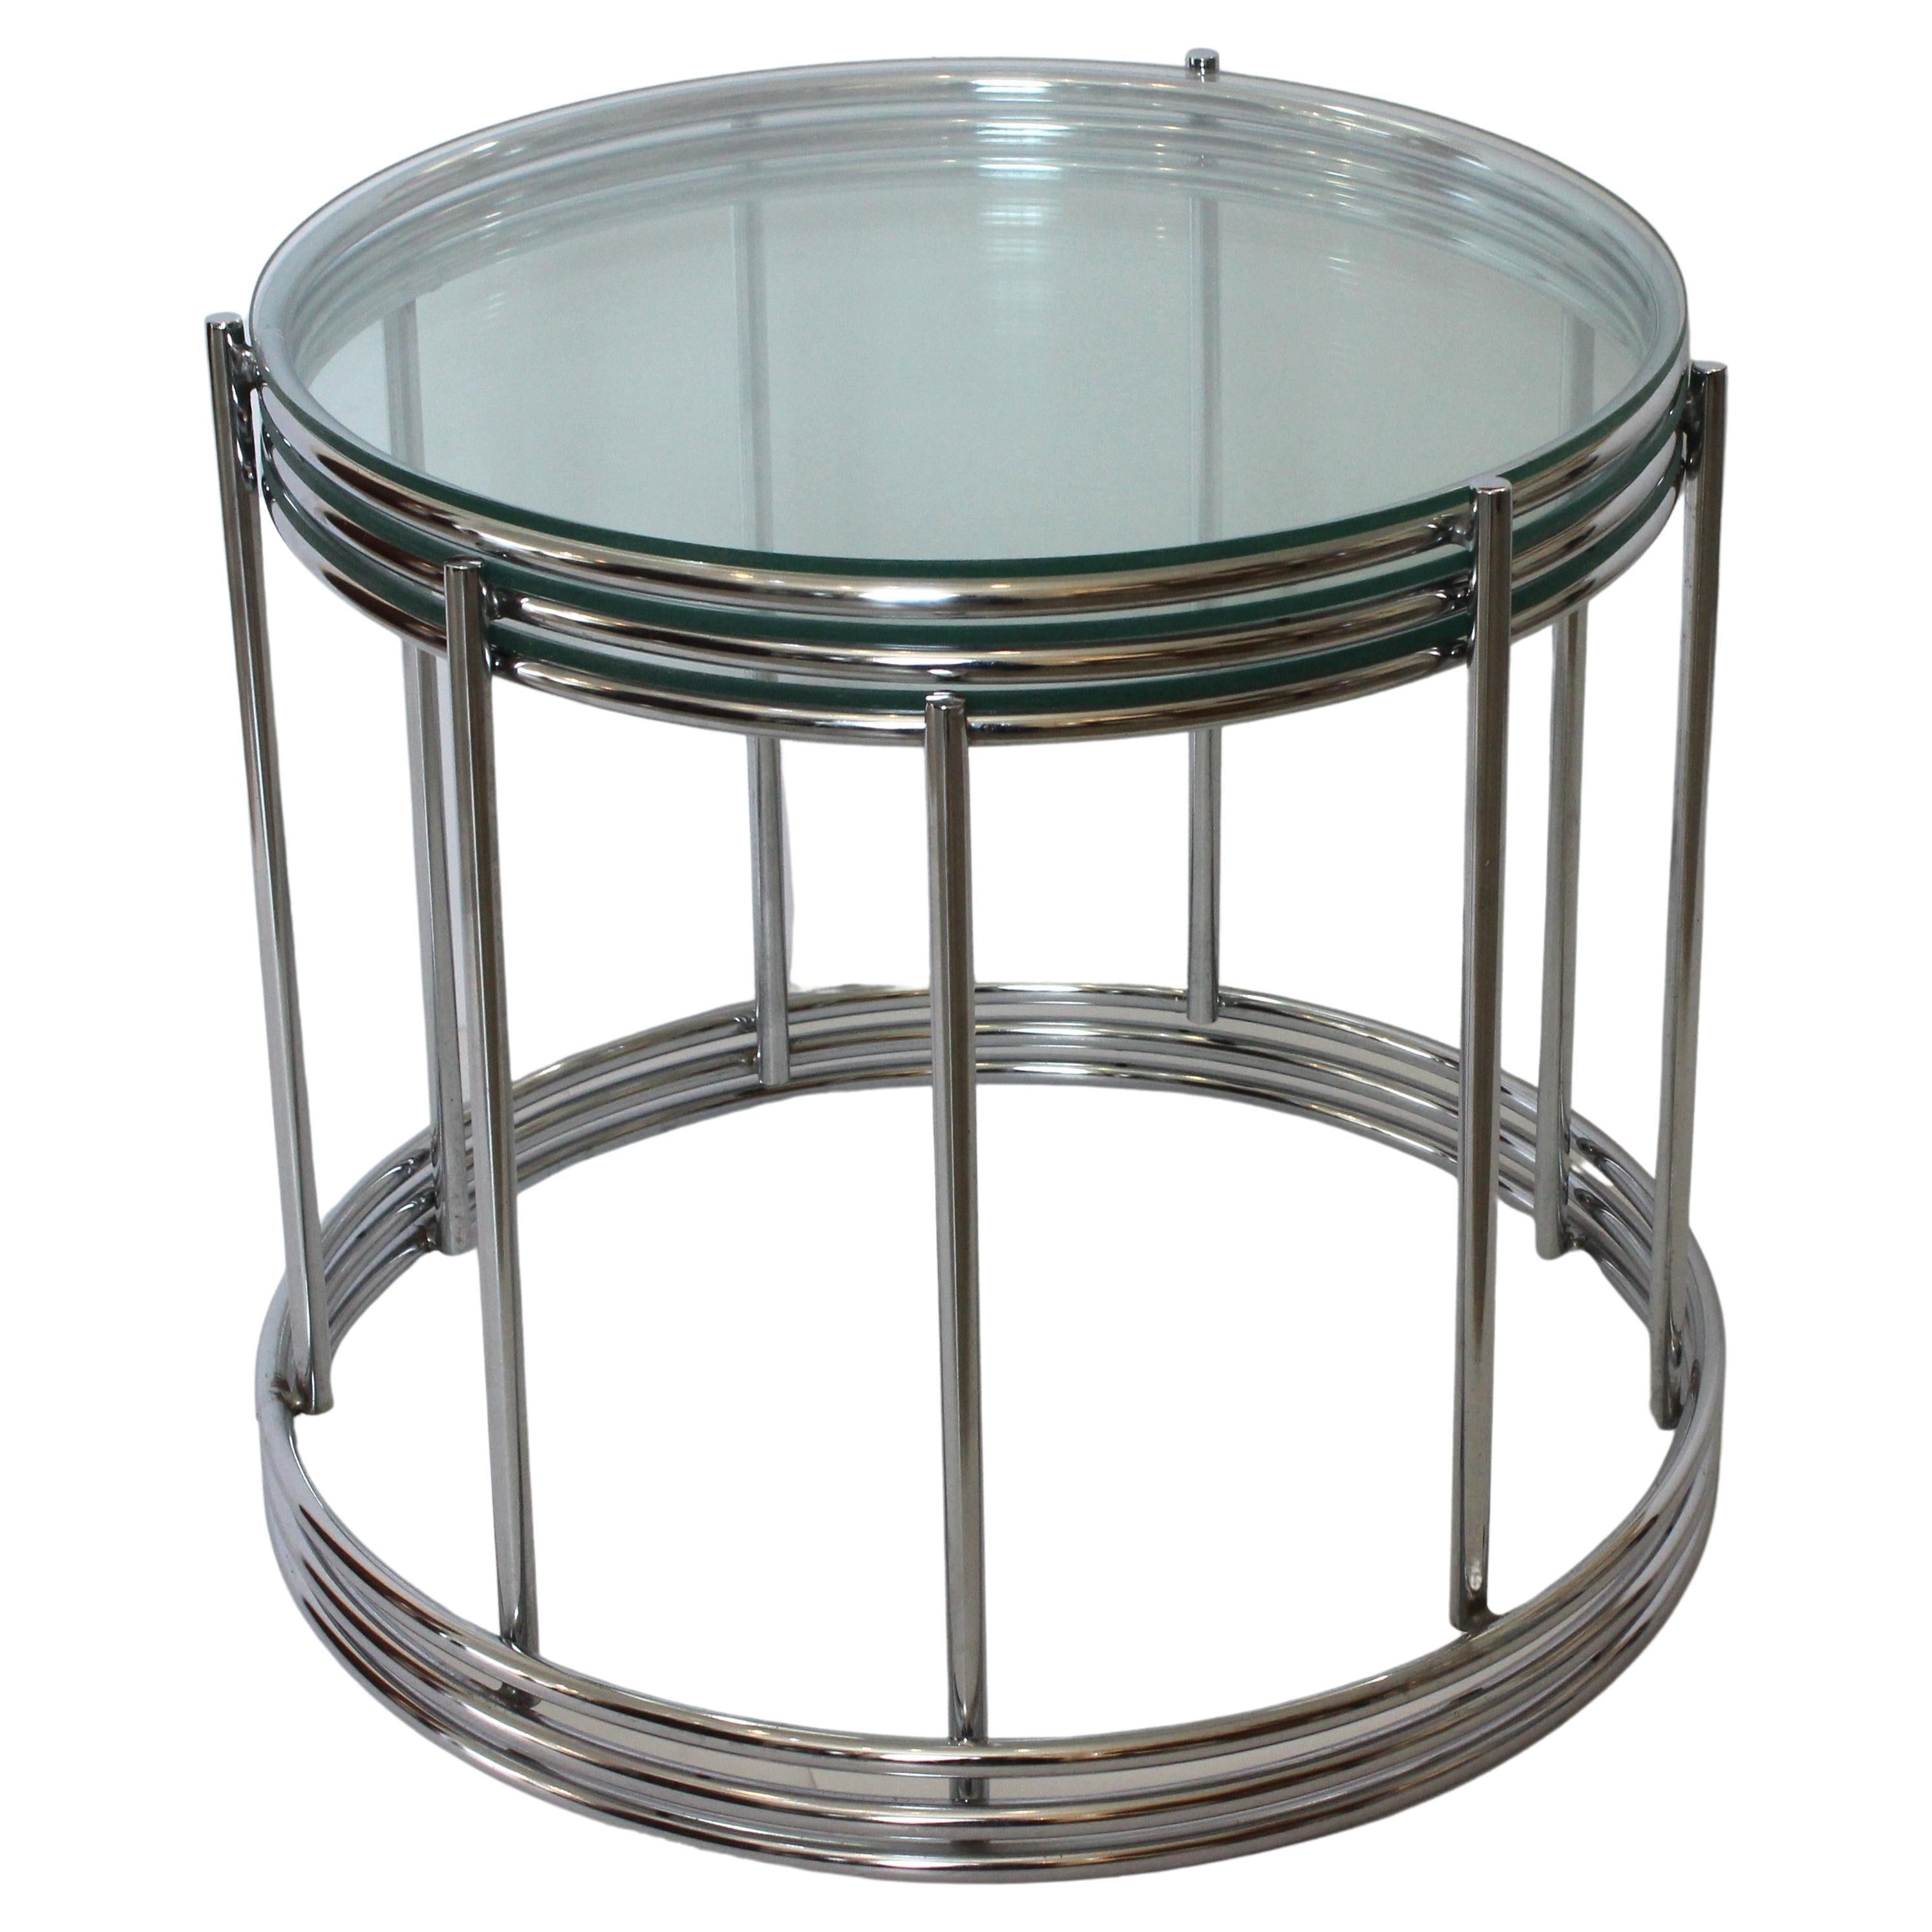 This stylish and chic three piece set of polished chrome and glass nesting tables date to the 1970s and were created by Saporiti.

Note We have another identical set available on the Dibs platform.